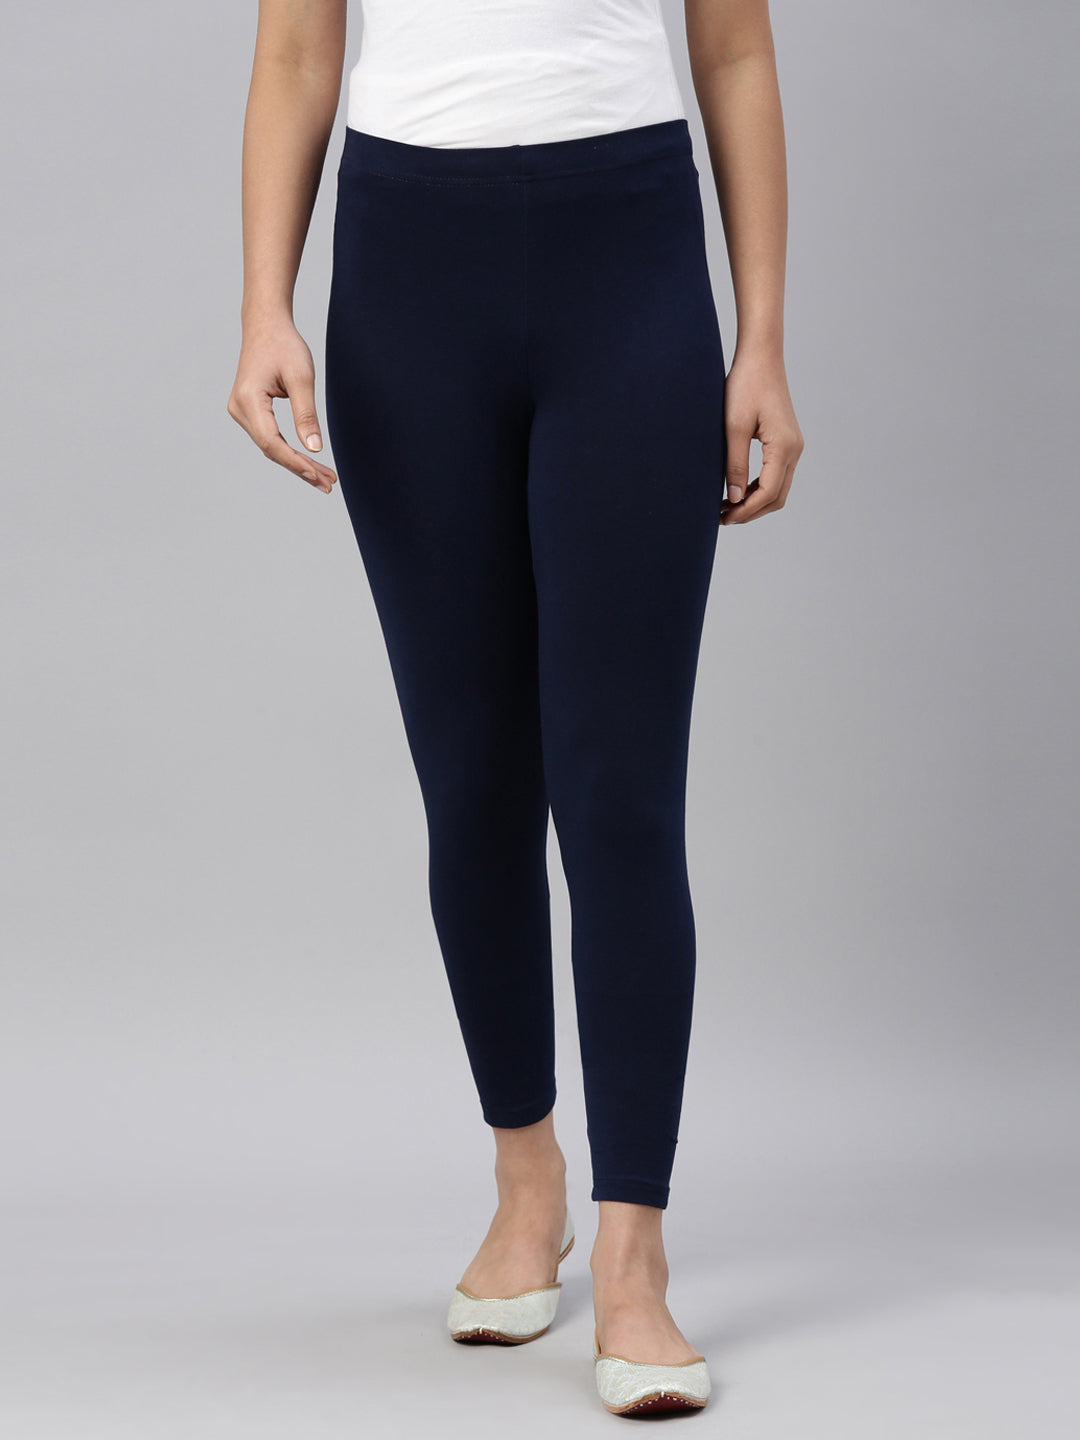 Buy Navy Blue Solid Knitted Women Tights Online - W for Woman